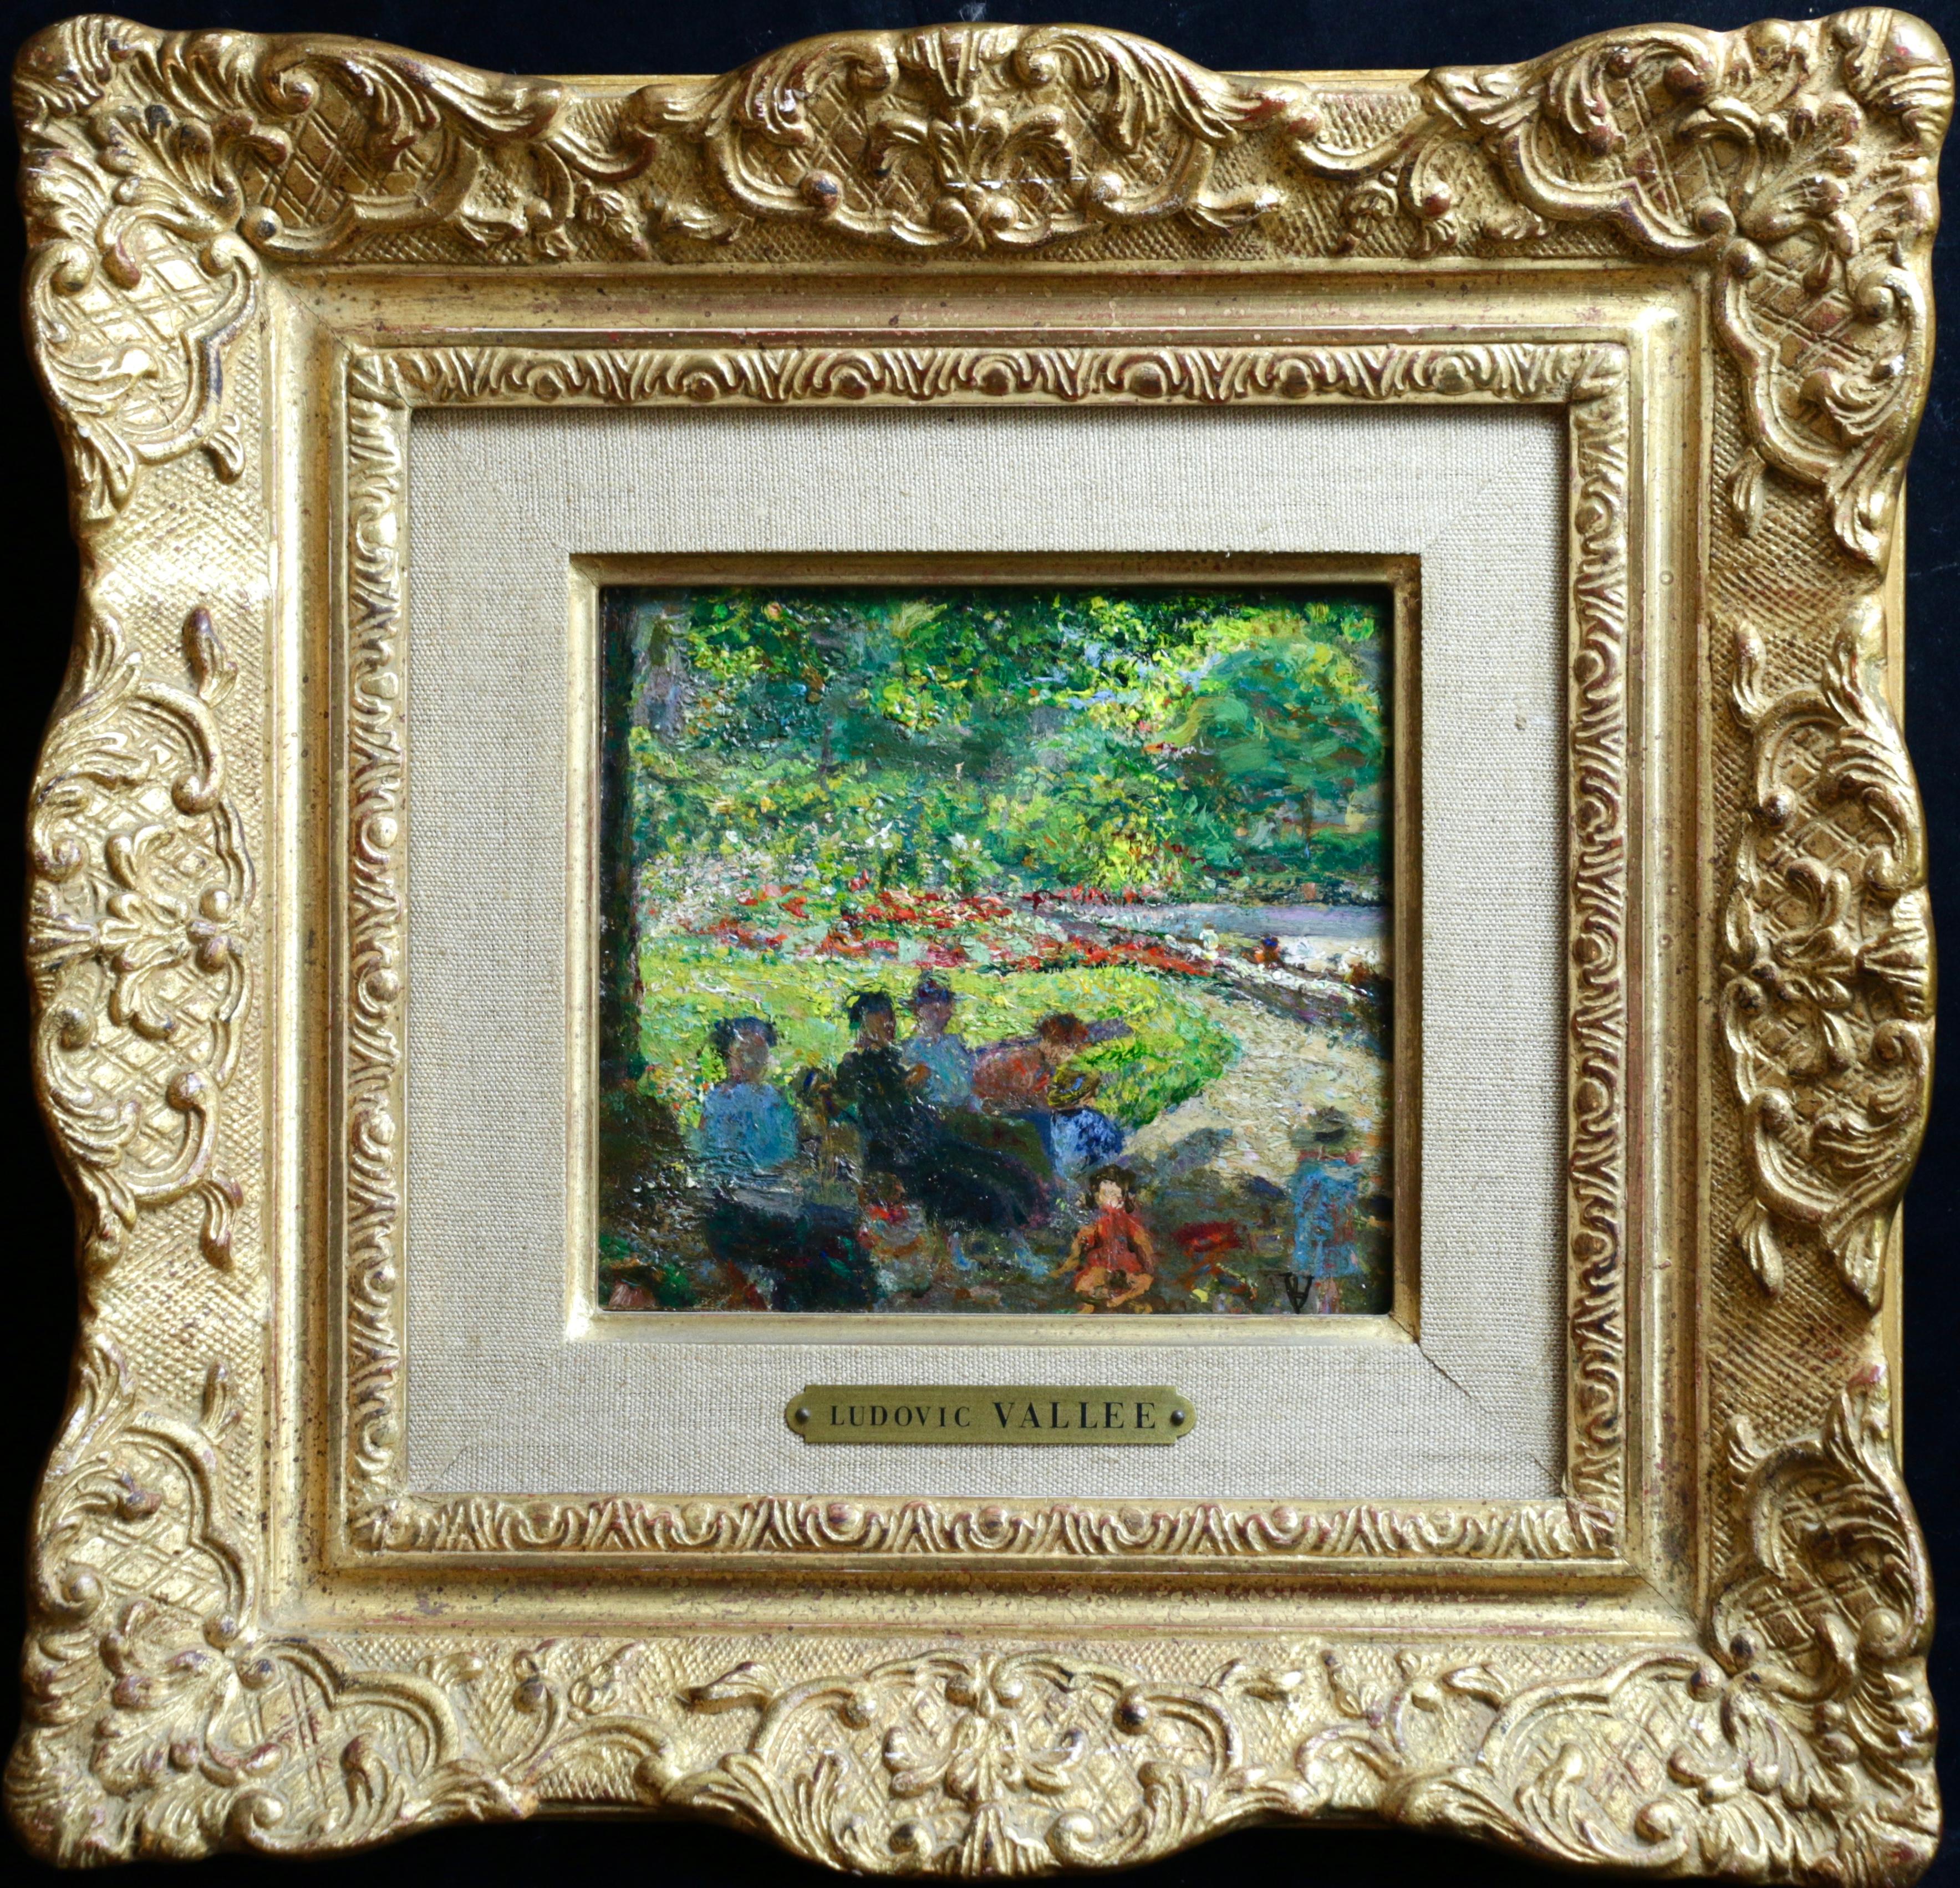 Ludovic Vallée Figurative Painting - "Figures in the Park" Vallee C.19th French Impressionist Figures in Landscape